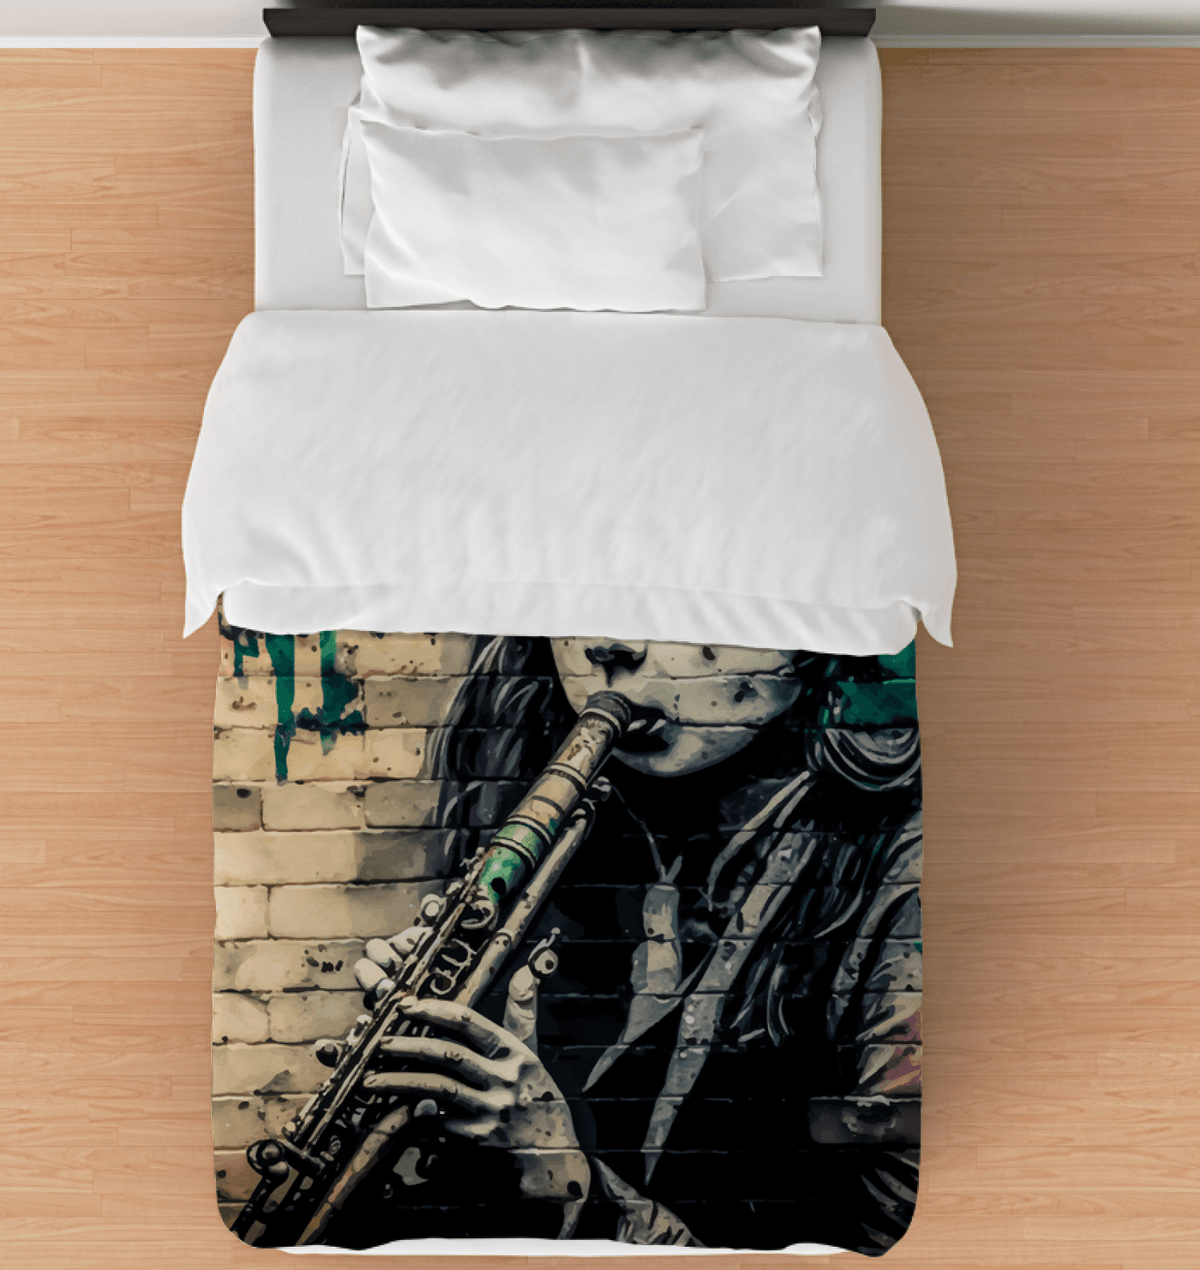 Breathing Life Into Music Duvet Cover - Beyond T-shirts